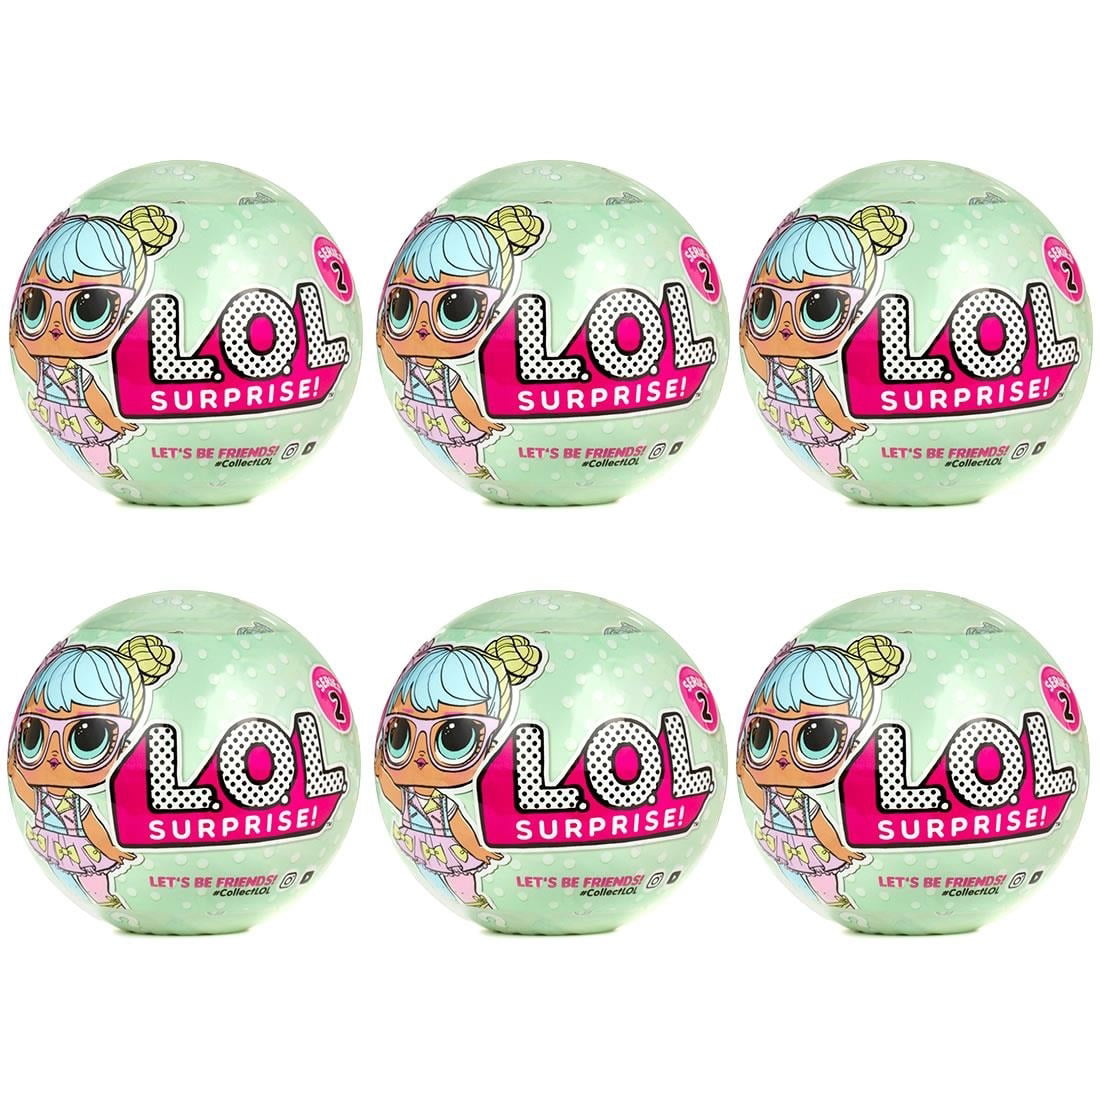 1 L.O.L Surprise SPARKLE SERIES Ball Big Sister Doll LOL 2 3 5 6 Wave IN STOCK